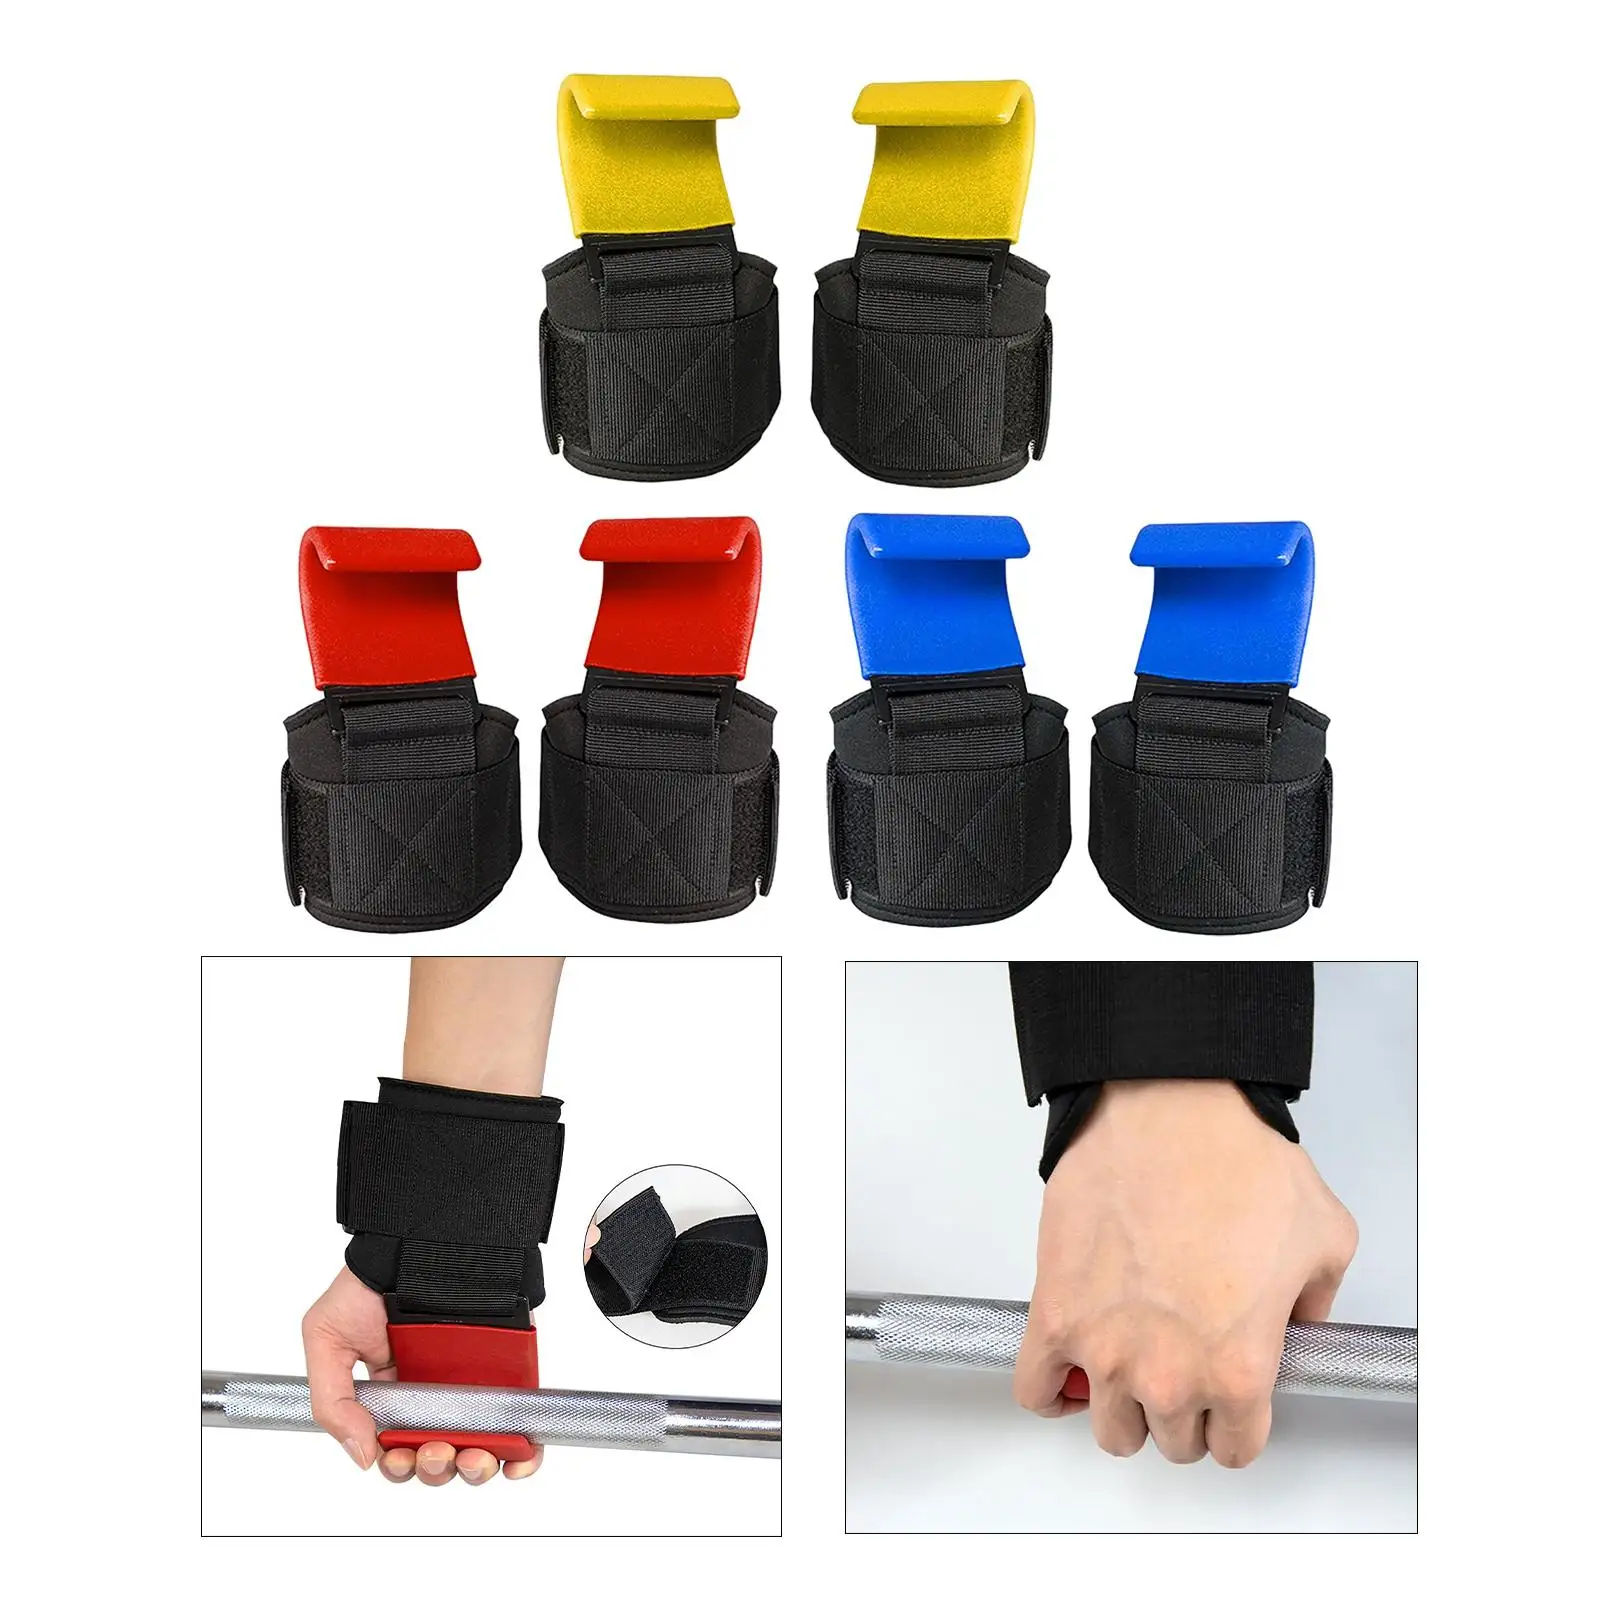 Weight Lifting Hooks Wrist Training Grips Straps for Deadlift Protective Gear